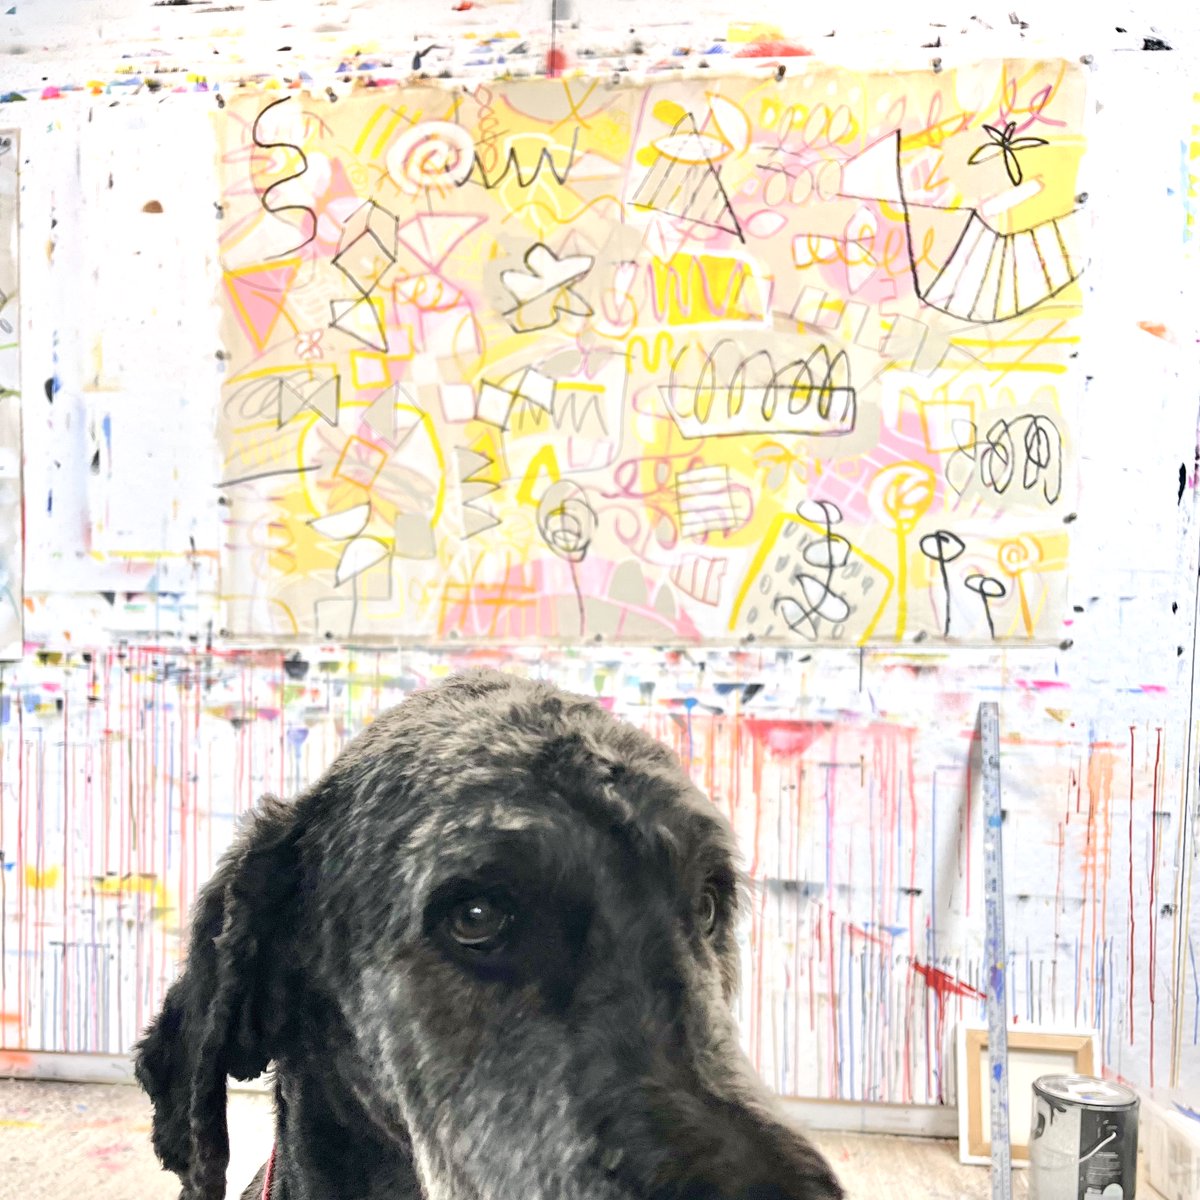 Gm! When your studio mate insists on a walk NOW.😆Make it a great day, frens! #NFTartist #artistprocess #NFTfamily #womenincrypto #abstractpainting #doggie